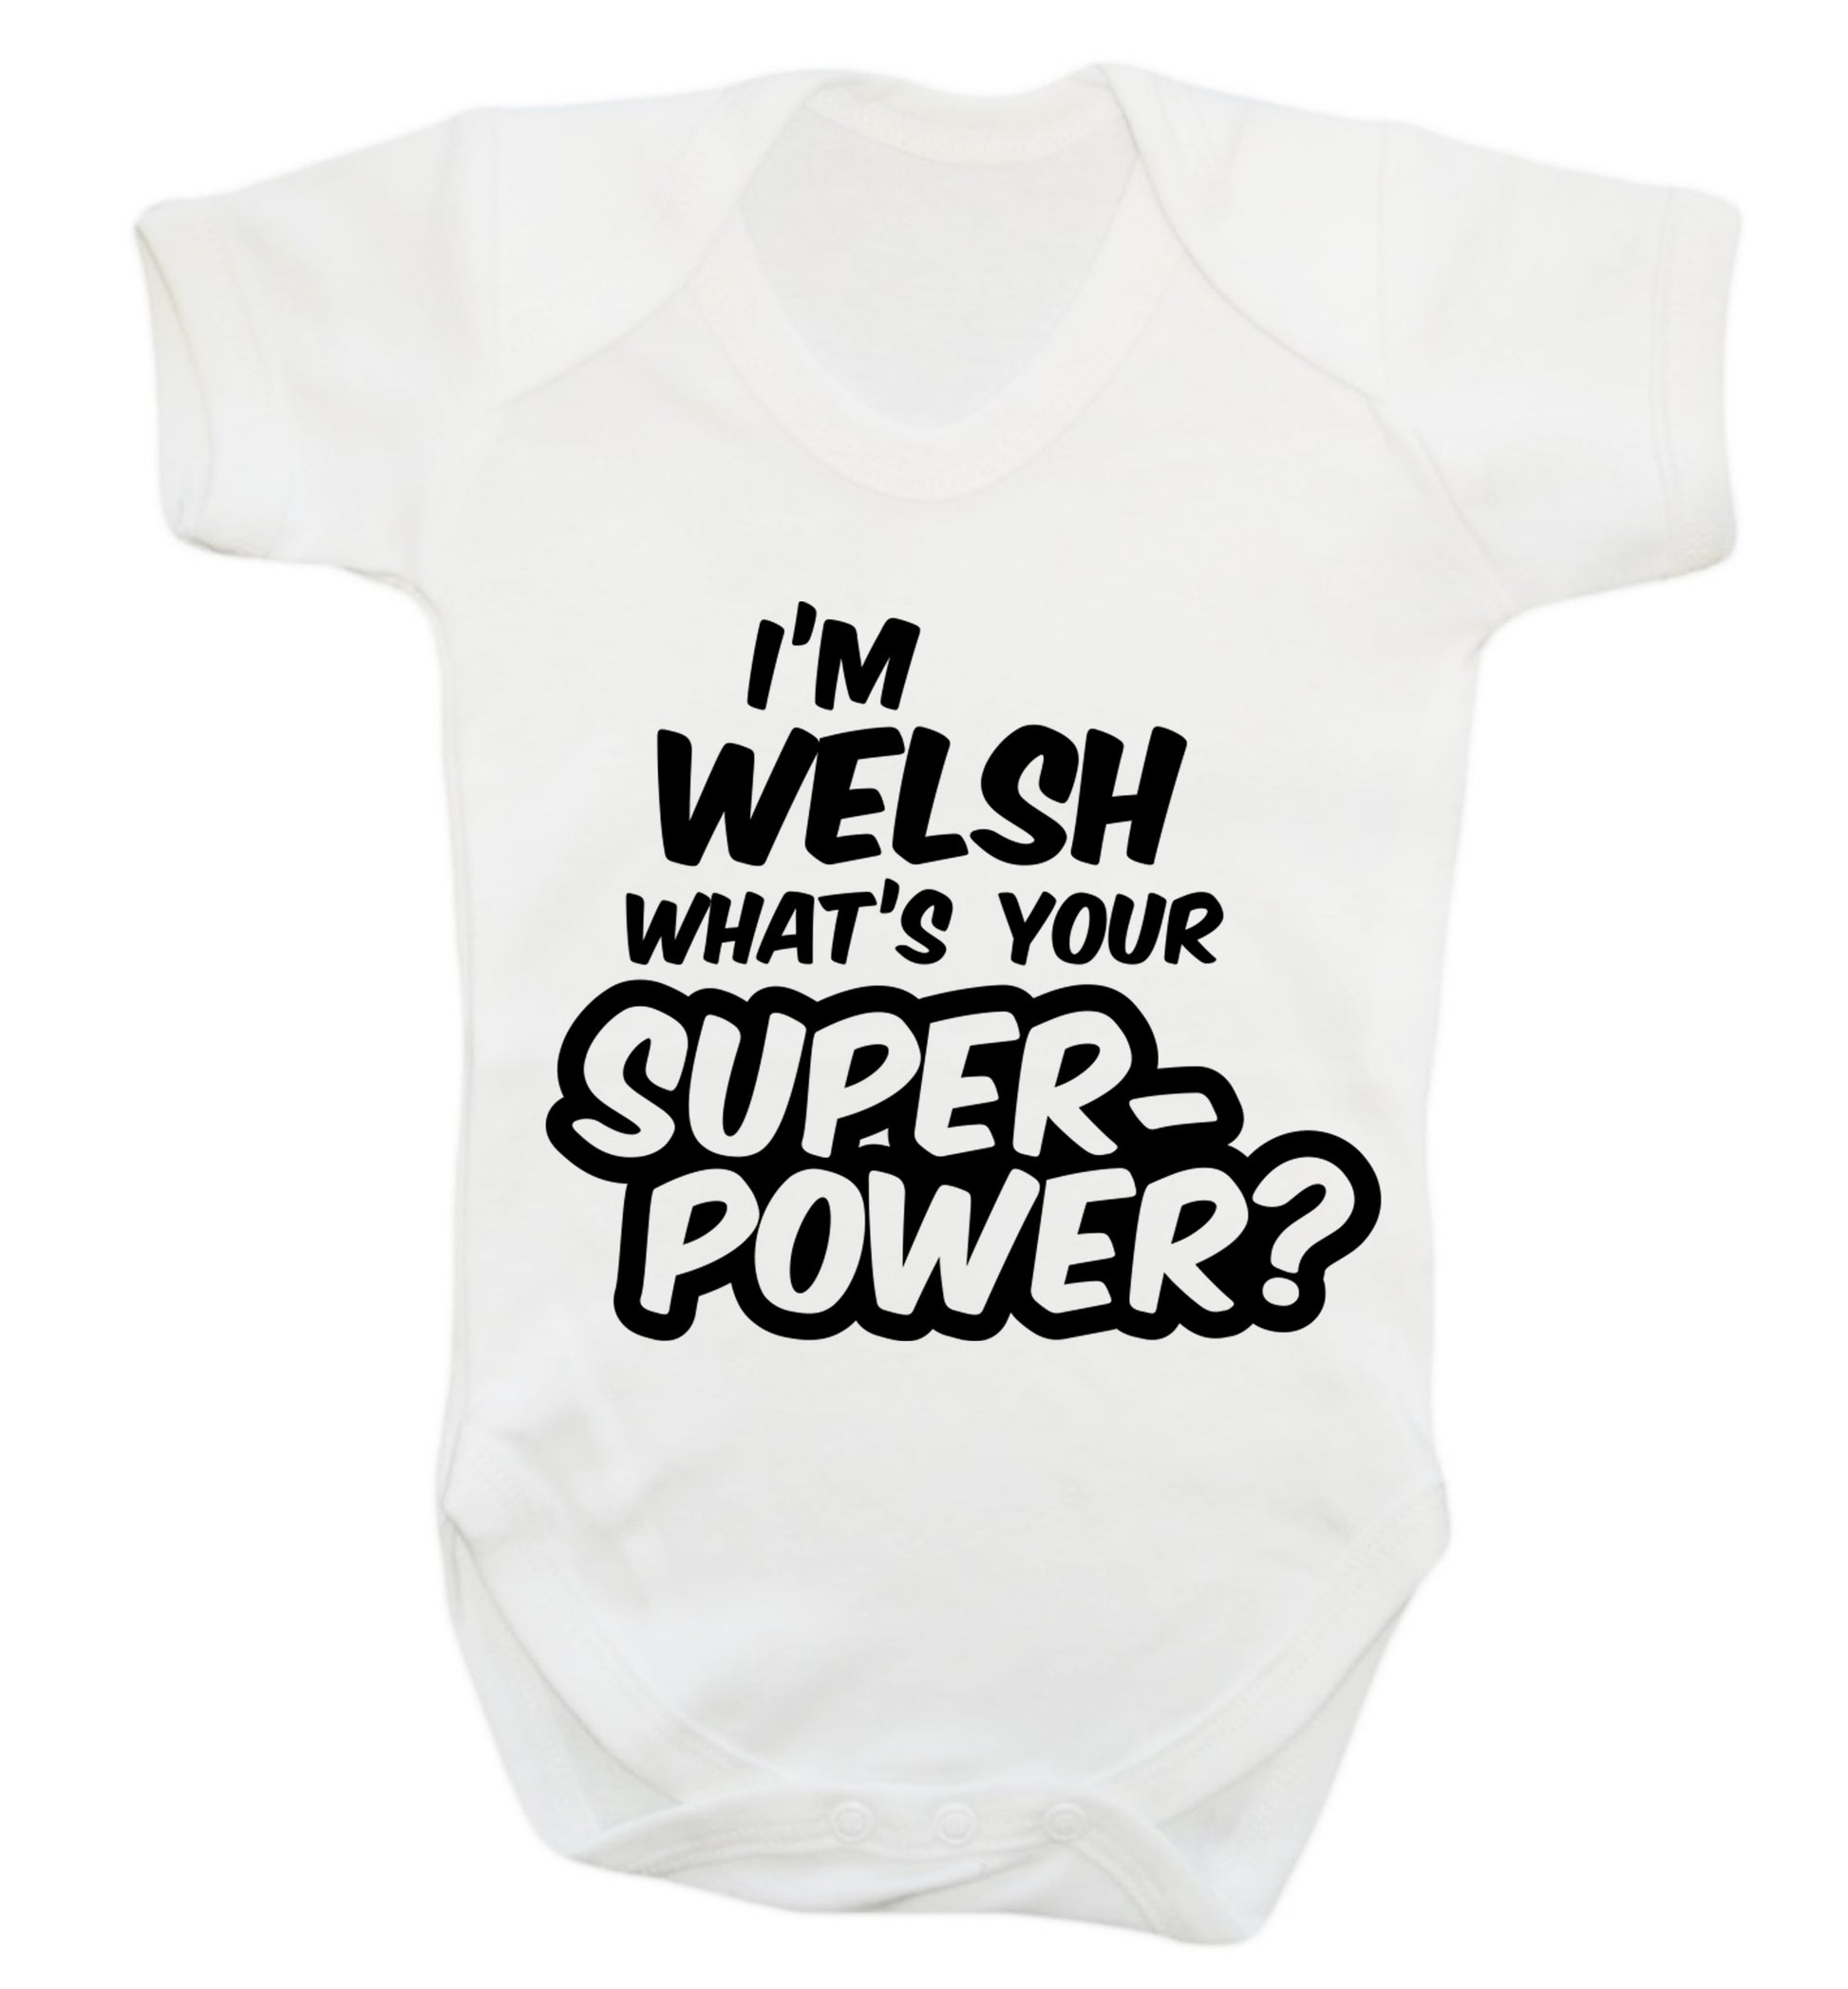 I'm Welsh what's your superpower? Baby Vest white 18-24 months